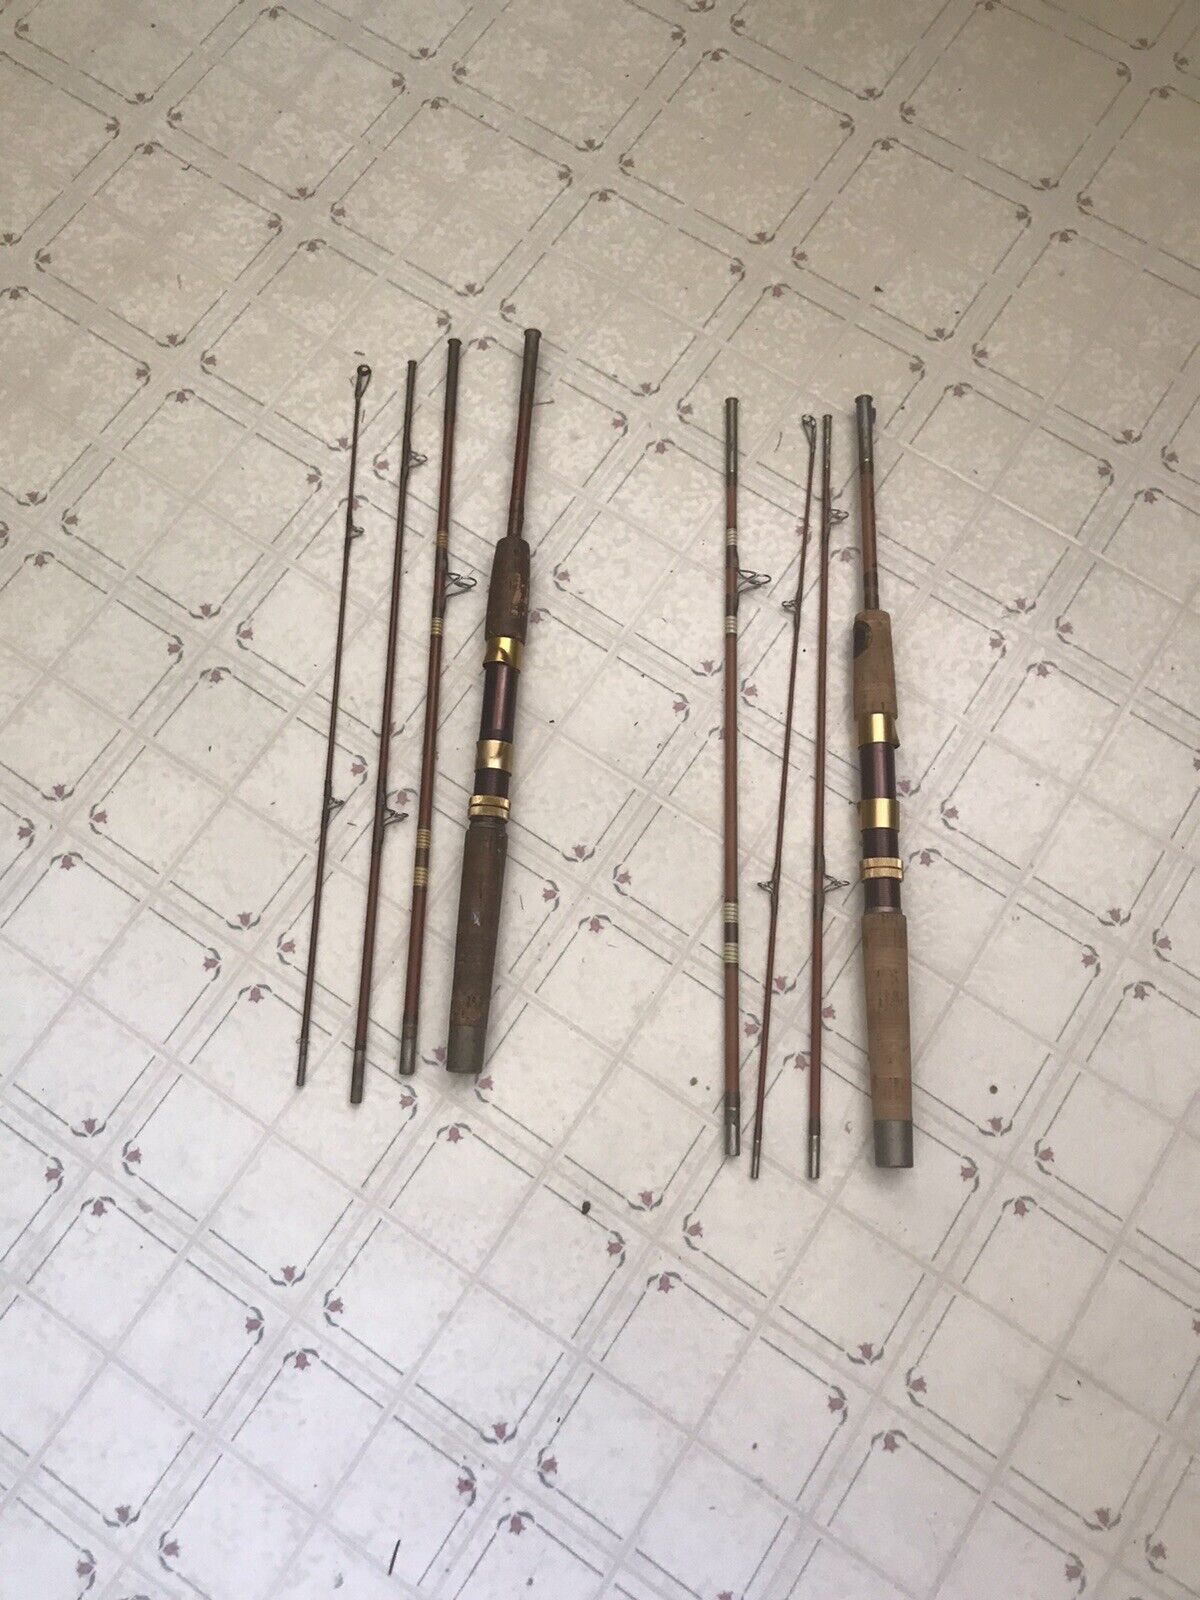 2 WRIGHT & MCGILL EAGLE CLAW TRAILMASTER PACK RODS 4 Pcs Vintage